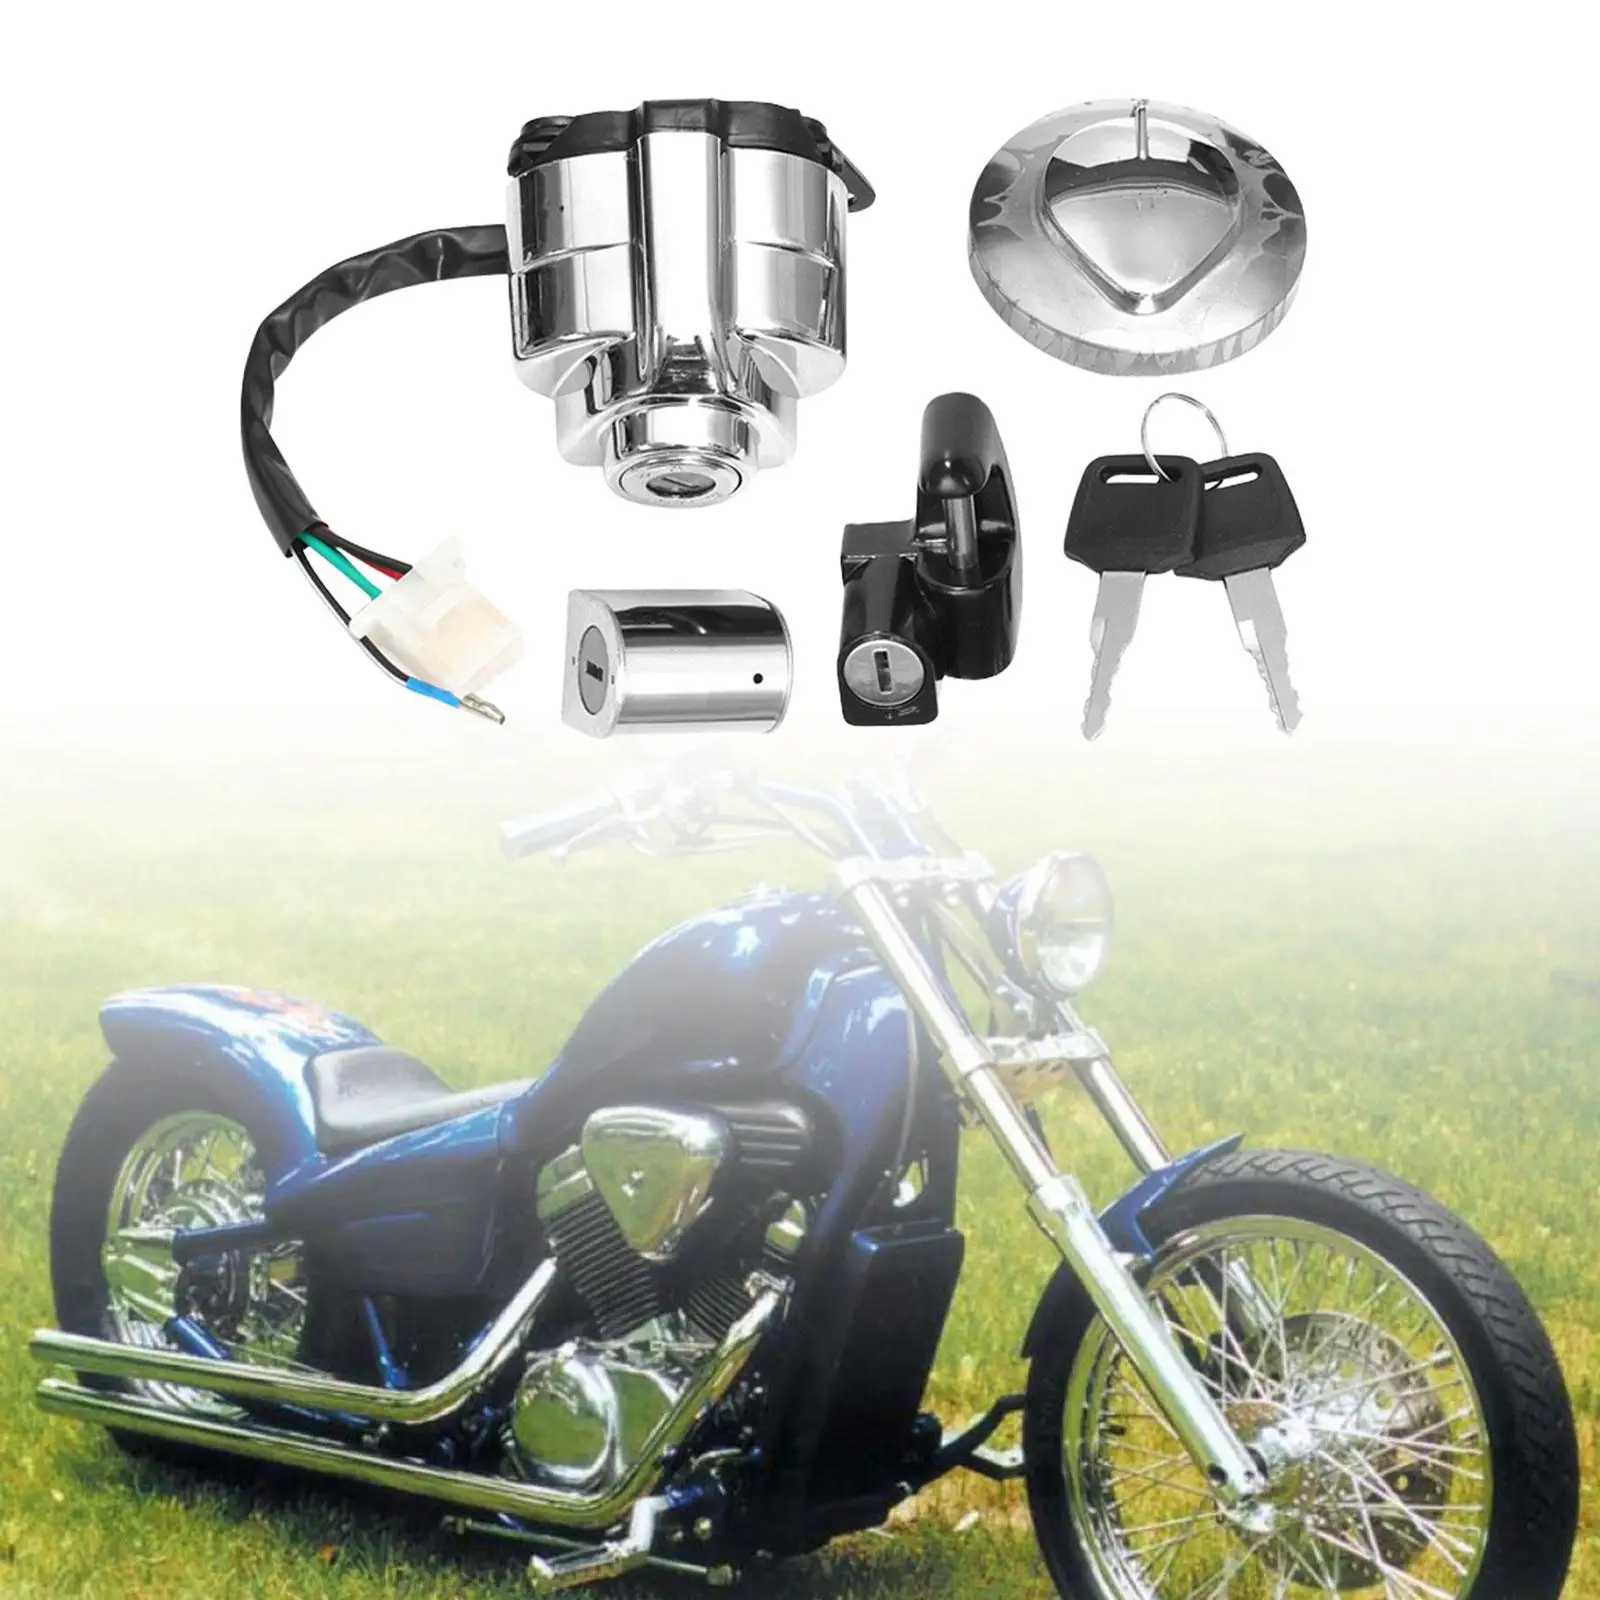 Ignition Switch Lock Fuel Gas Cap Key Durable Direct Replaces for Honda Shadow Vlx VT 400 750 600 Easy Installation